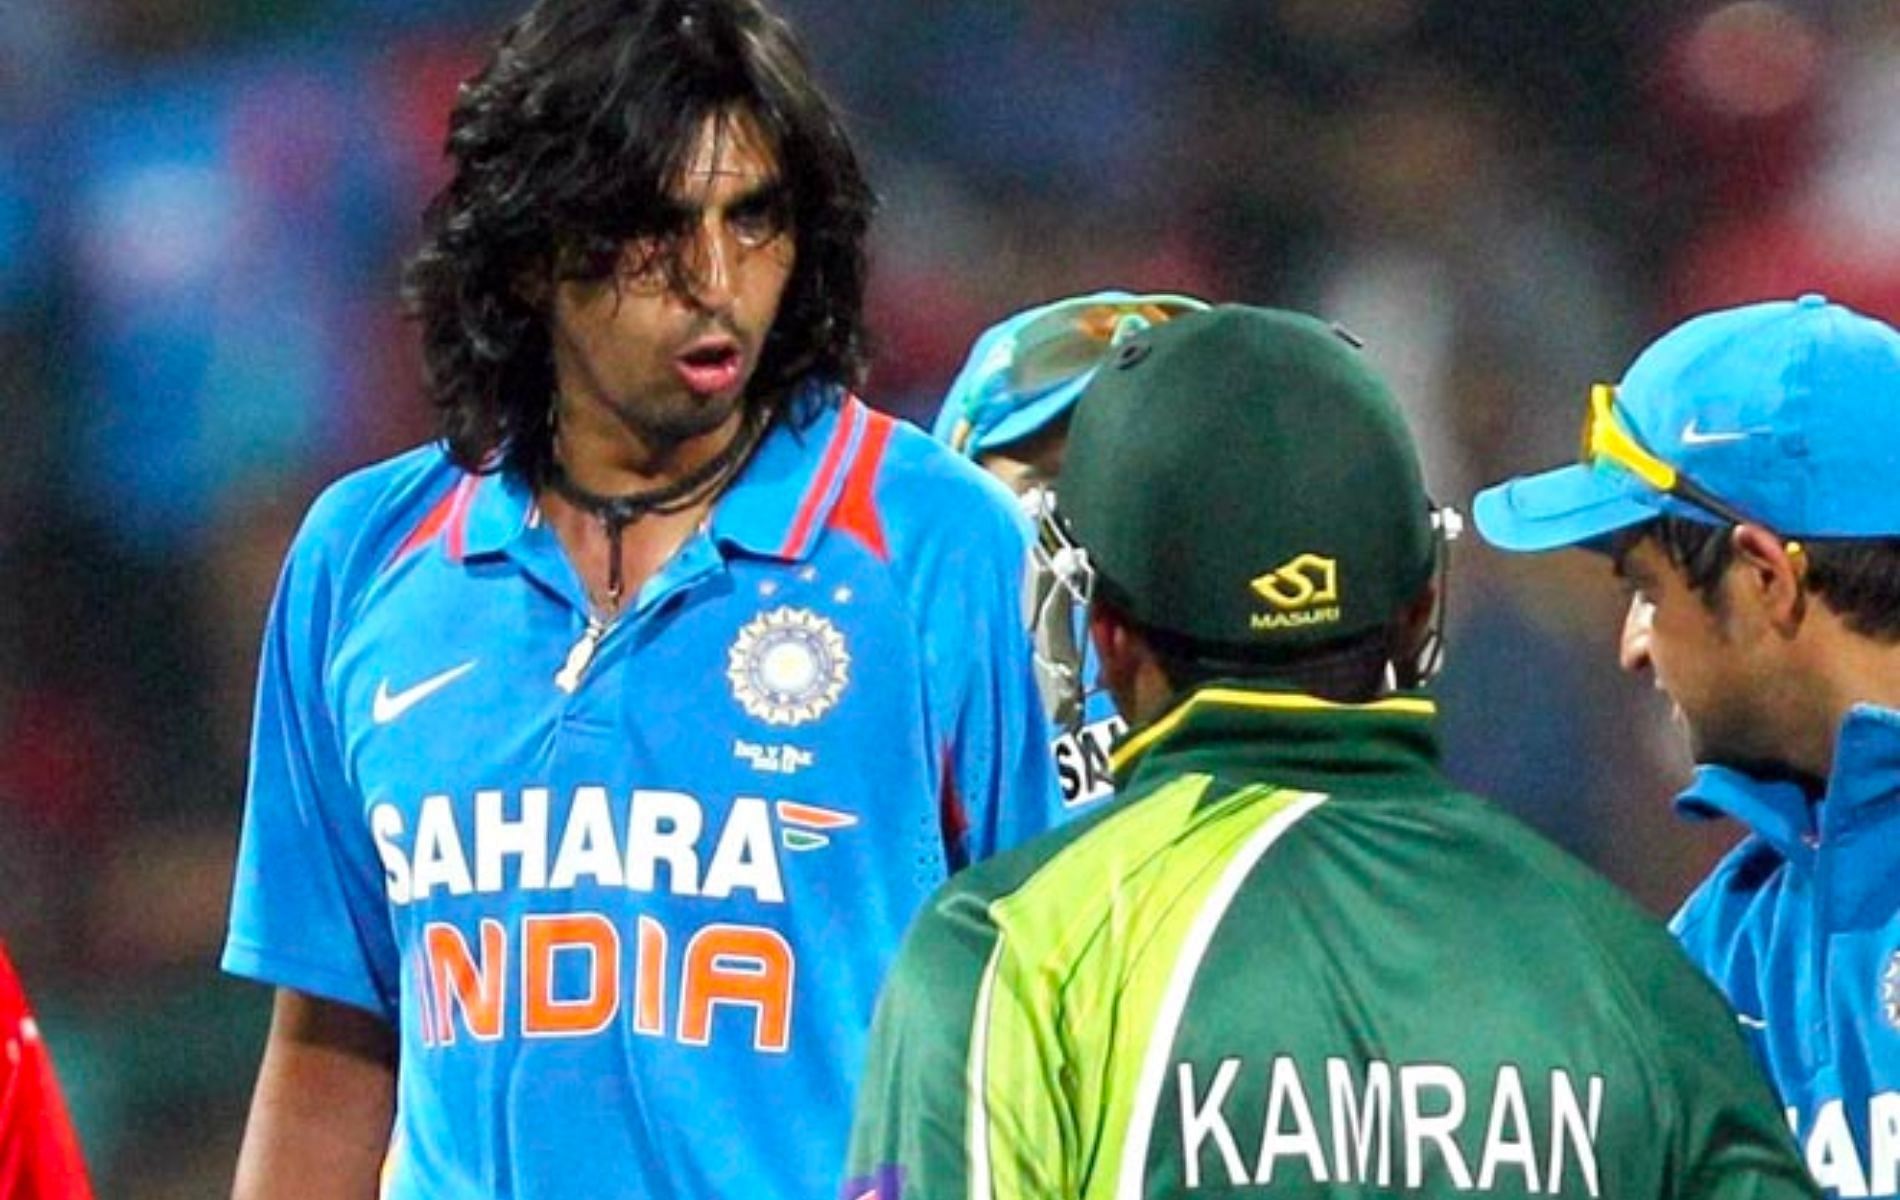 Ishant Sharma and Kamran Akmal were involved in a heated exchange in December 2012. (Pic: Twitter)